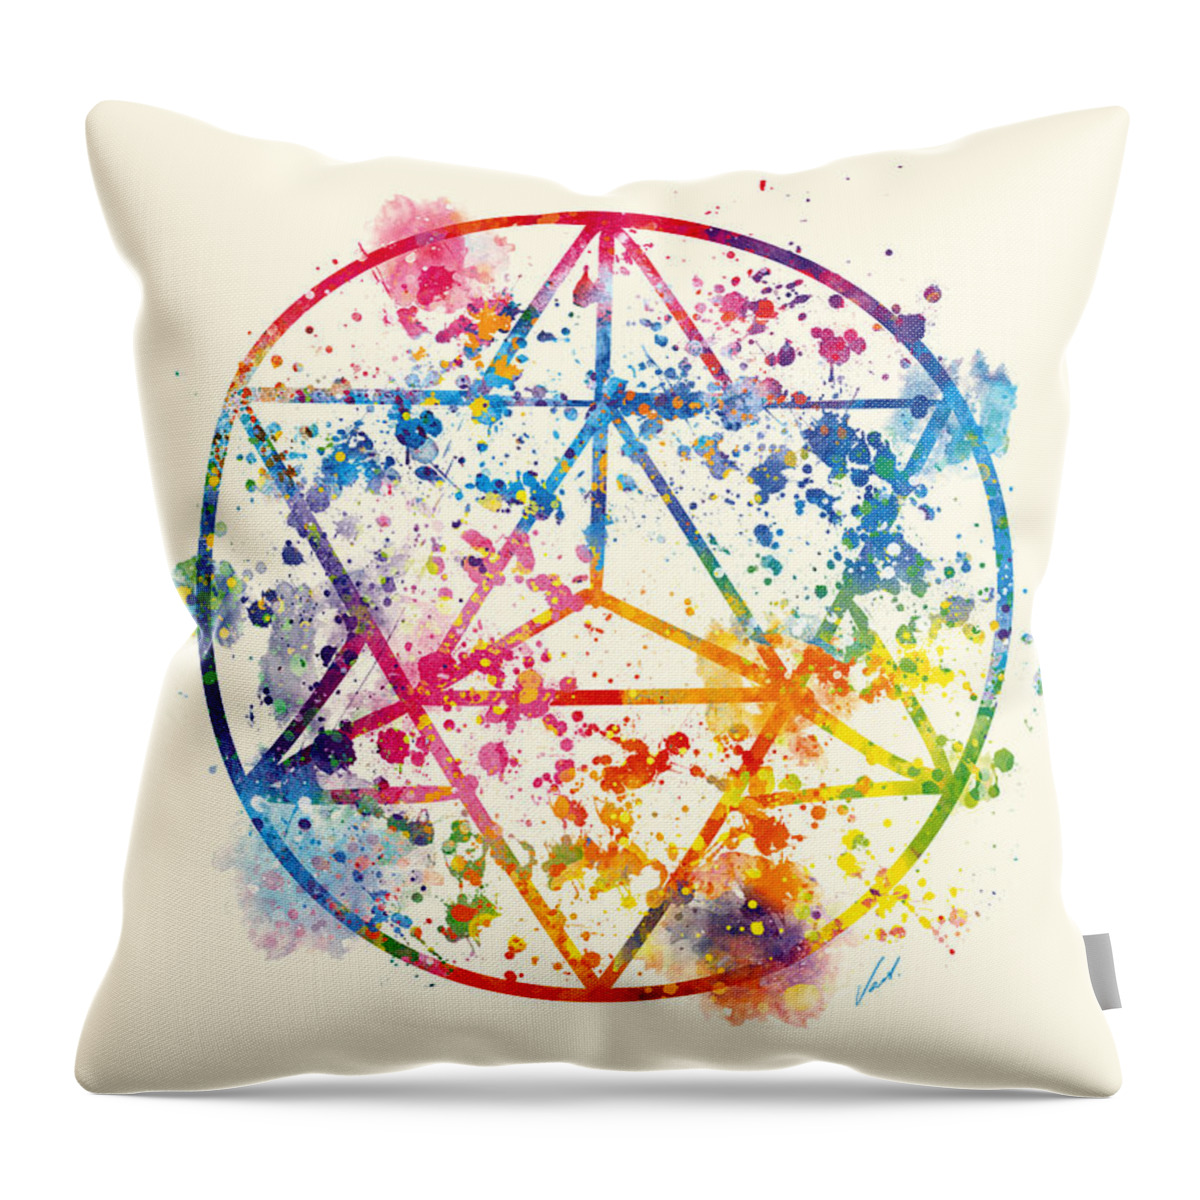 Watercolor Throw Pillow featuring the painting Watercolor - Sacred Geometry For Good Luck by Vart by Vart